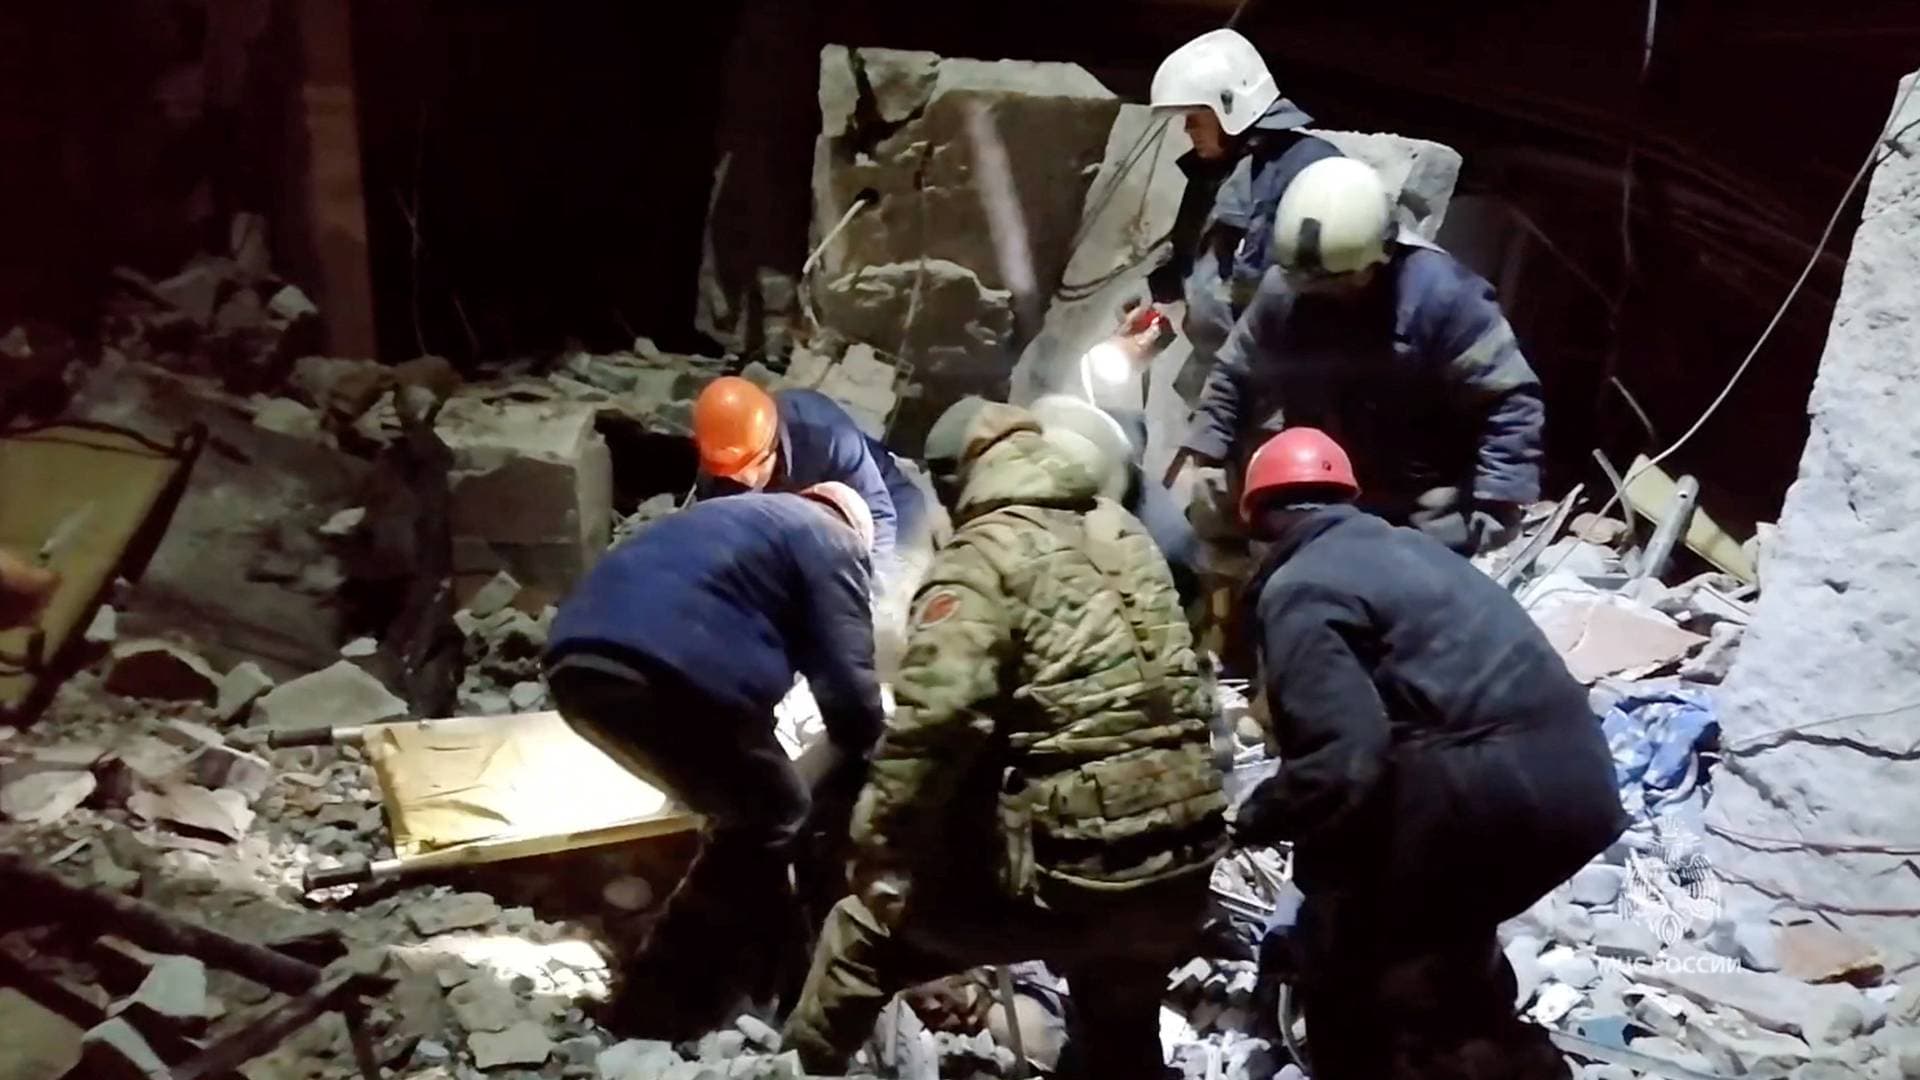 Emergency workers retrieve bodies from the rubble of a building following a missile strike in Lysychansk on February 3.